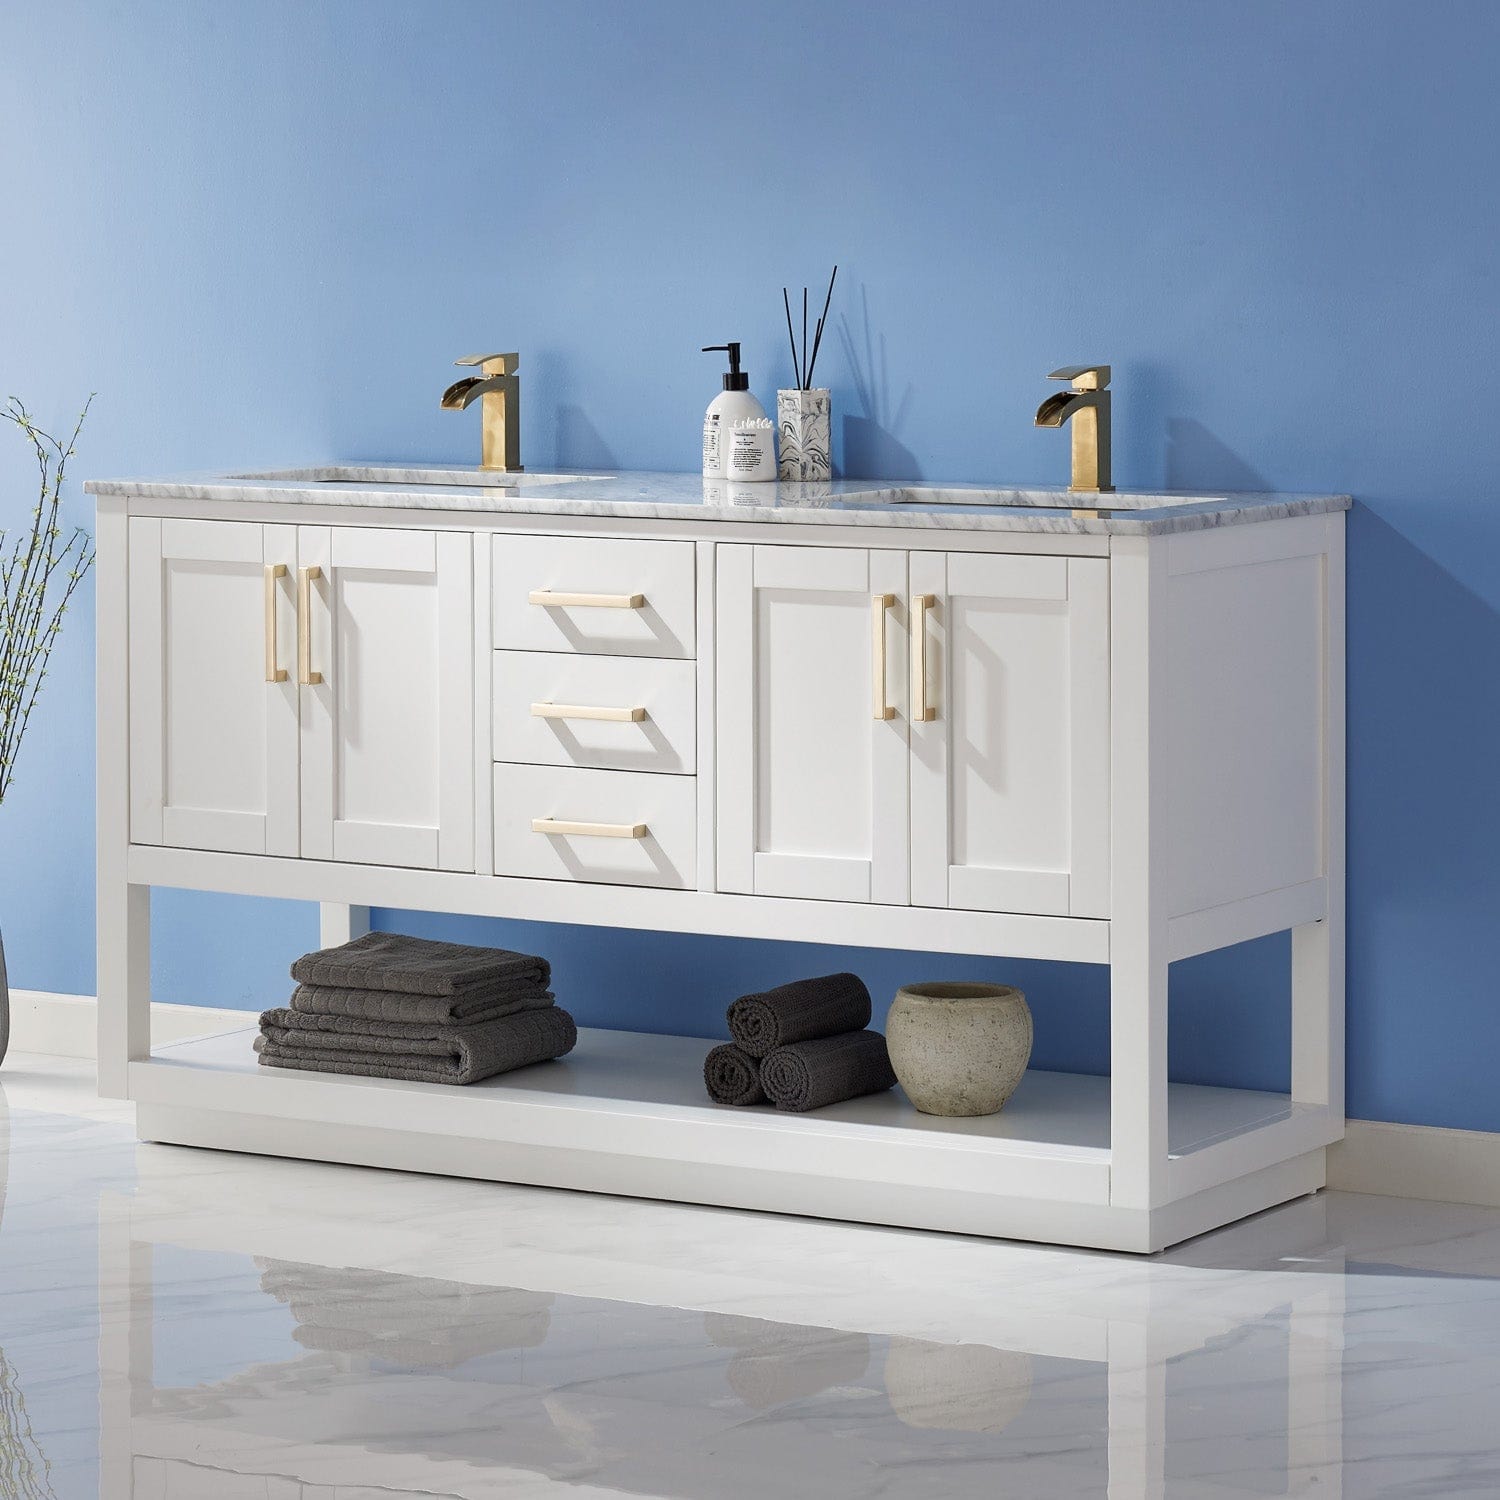 Altair Remi 60" Double Bathroom Vanity Set in White and Carrara White Marble Countertop without Mirror 532060-WH-CA-NM - Molaix631112971560Vanity532060-WH-CA-NM